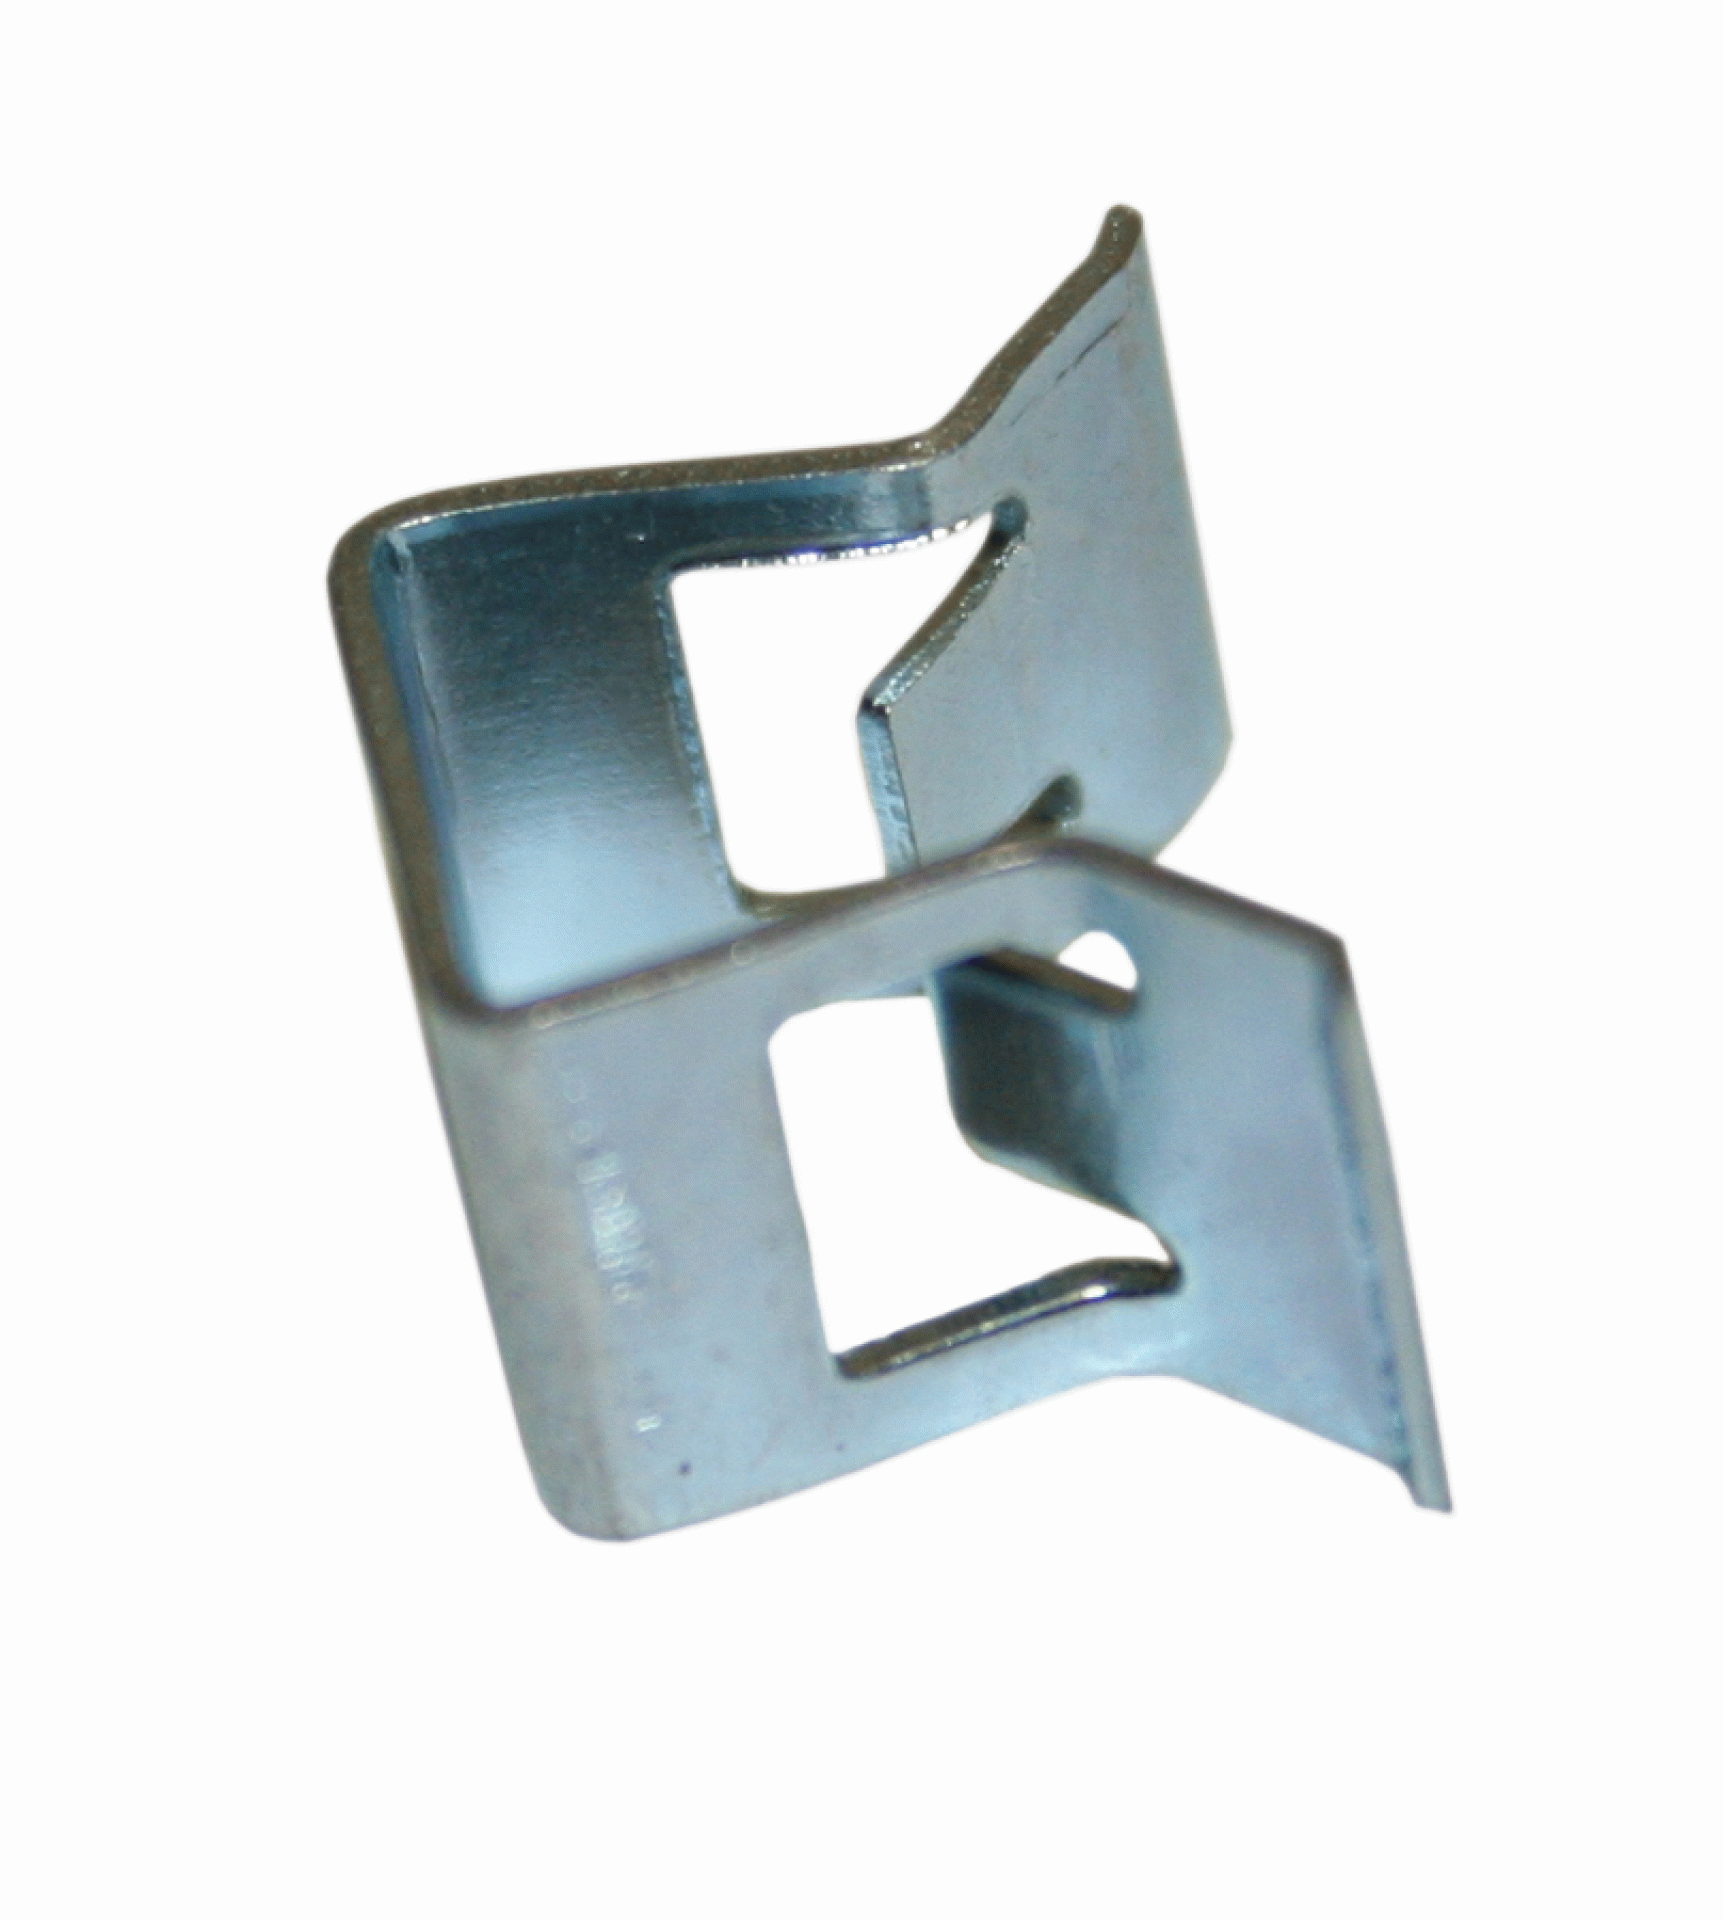 DEXTER AXLE CO. | 027-050-00 | CLIP MAGNET FOR 12-1/4 INCH X 3-3/8 INCH BRAKE